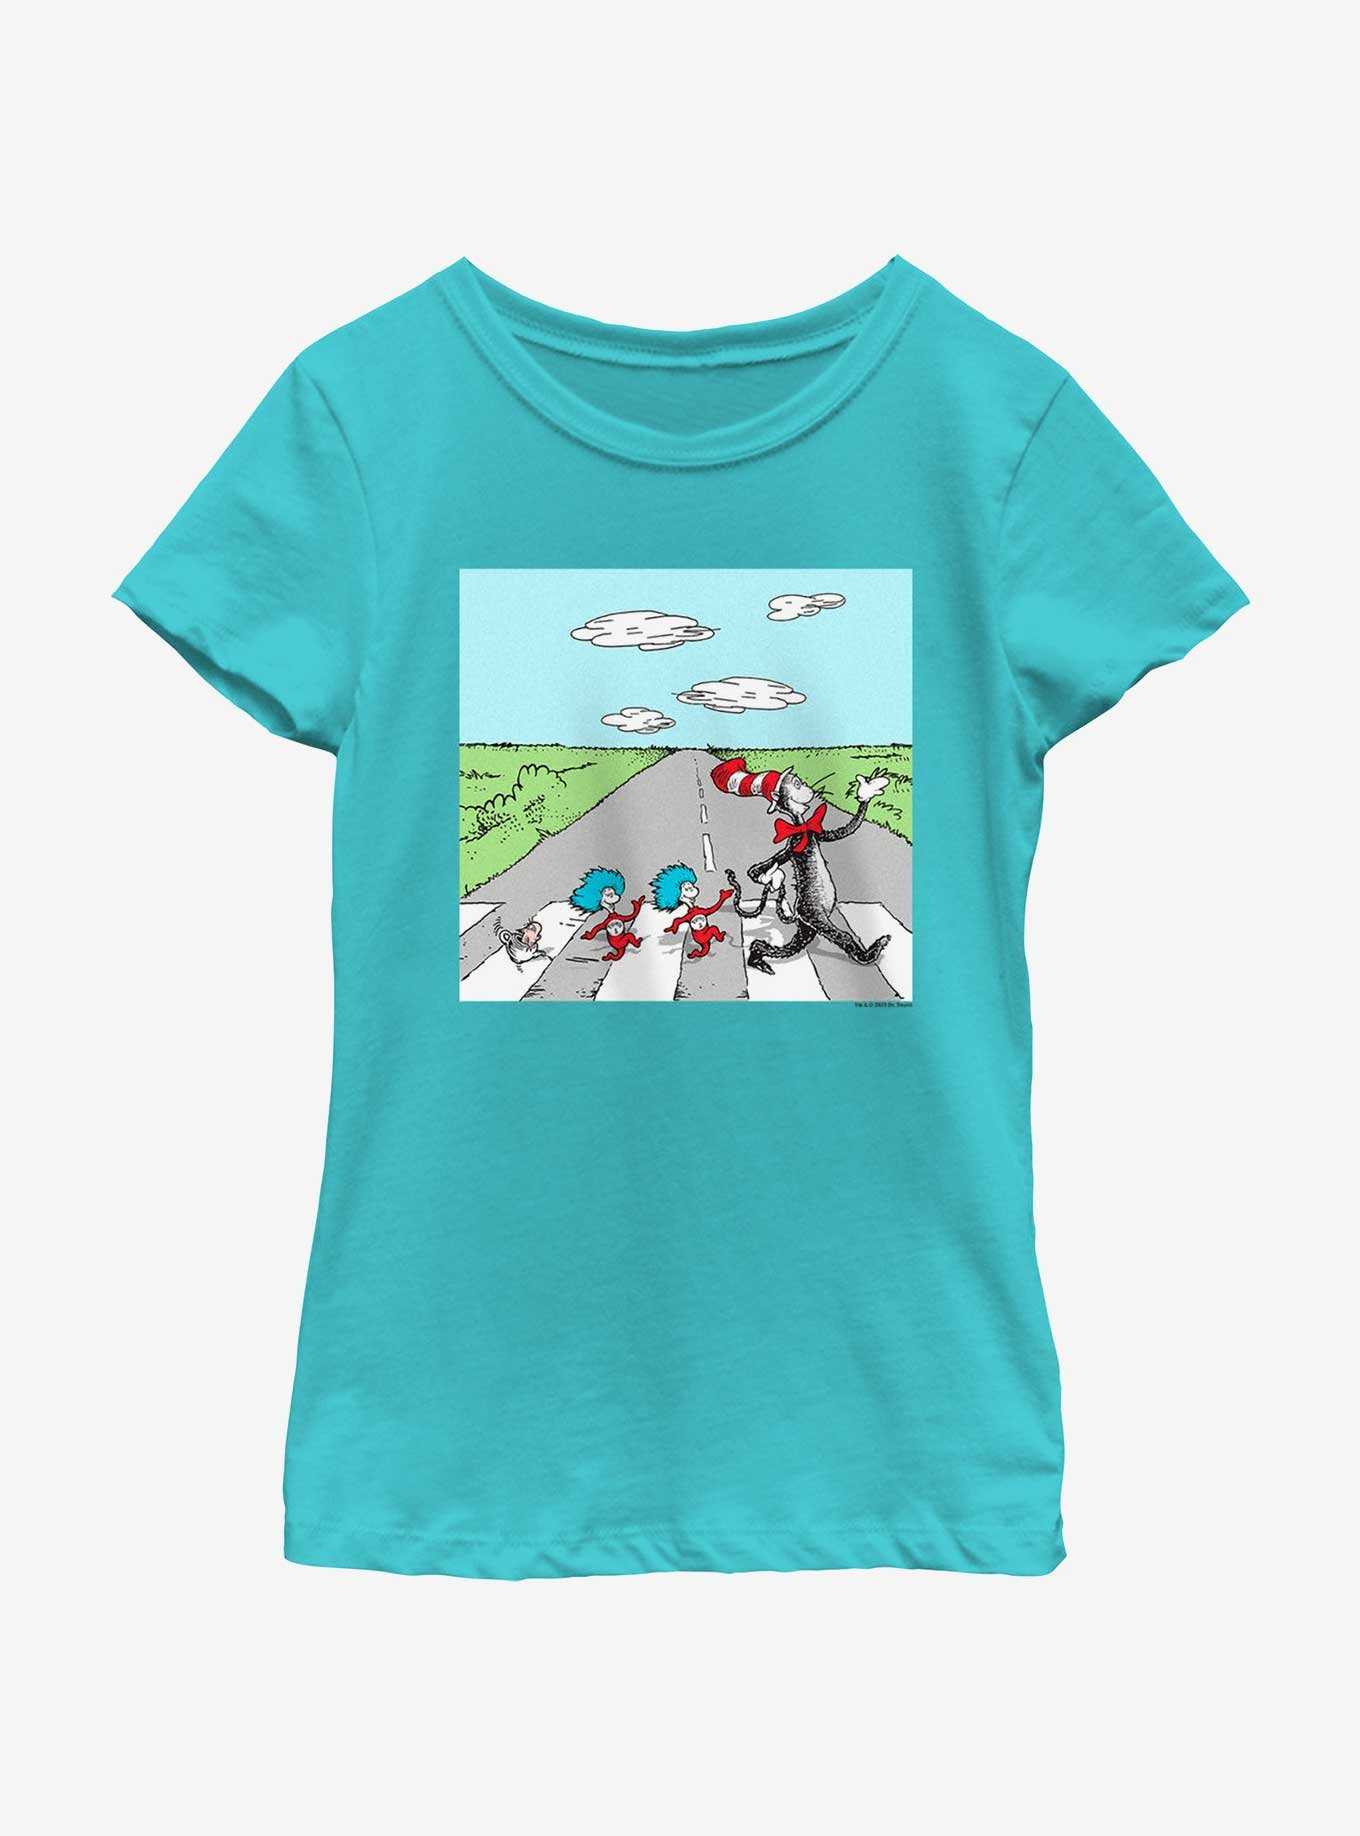 Dr. Seuss's Cat In The Hat Crossing Youth Girls T-Shirt, , hi-res